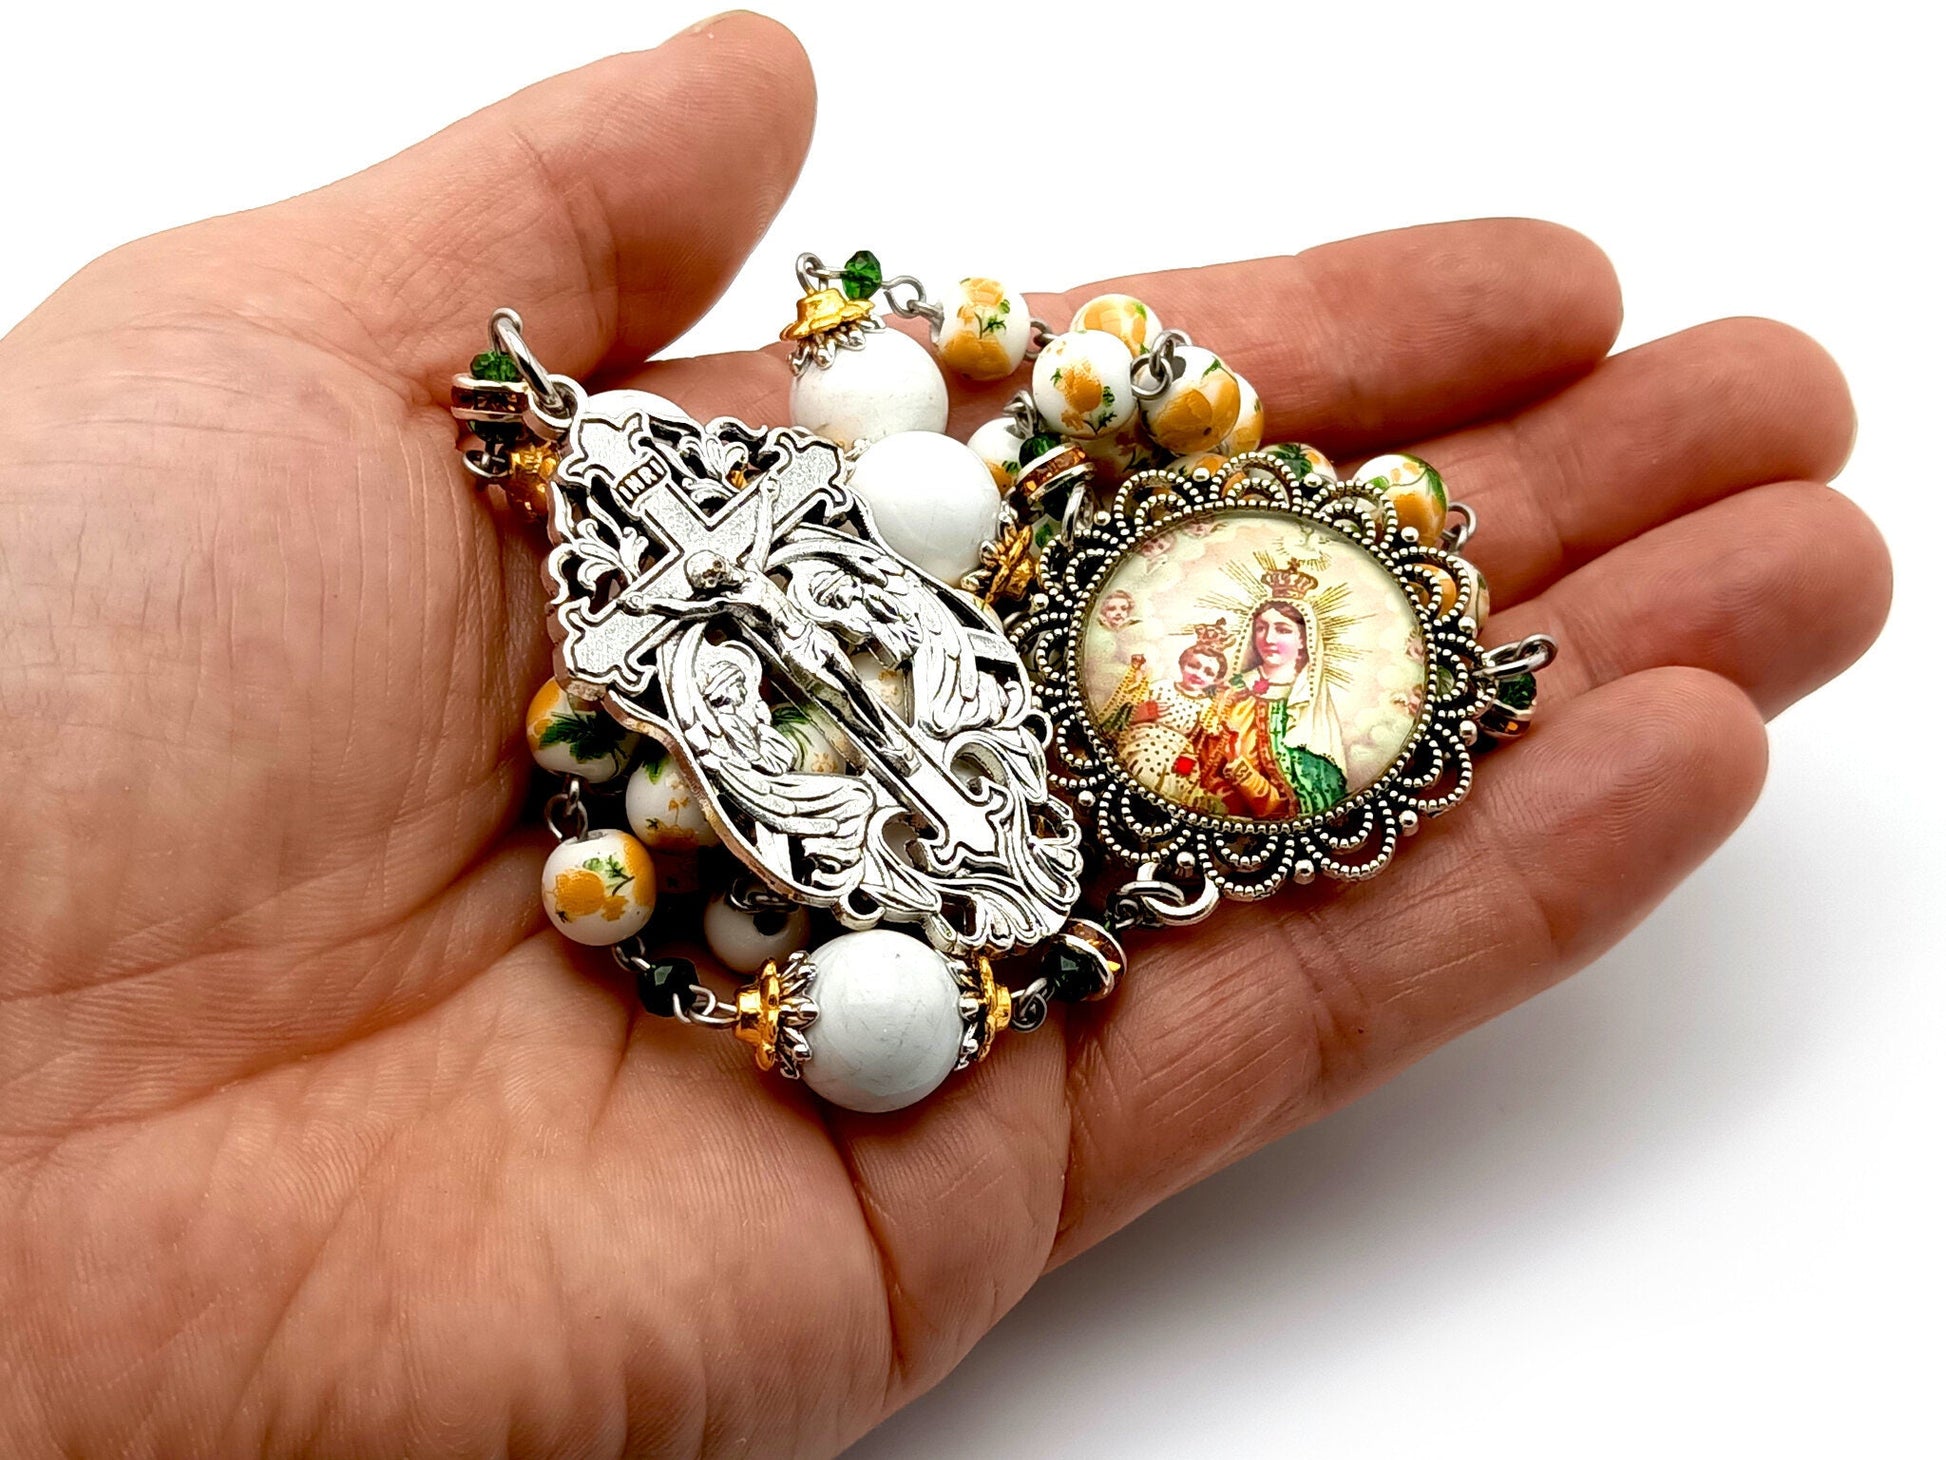 Our Lady of Mount Carmel unique rosary beads with floral porcelain and white howlite gemstone beads, silver angel crucifix and picture centre medal.